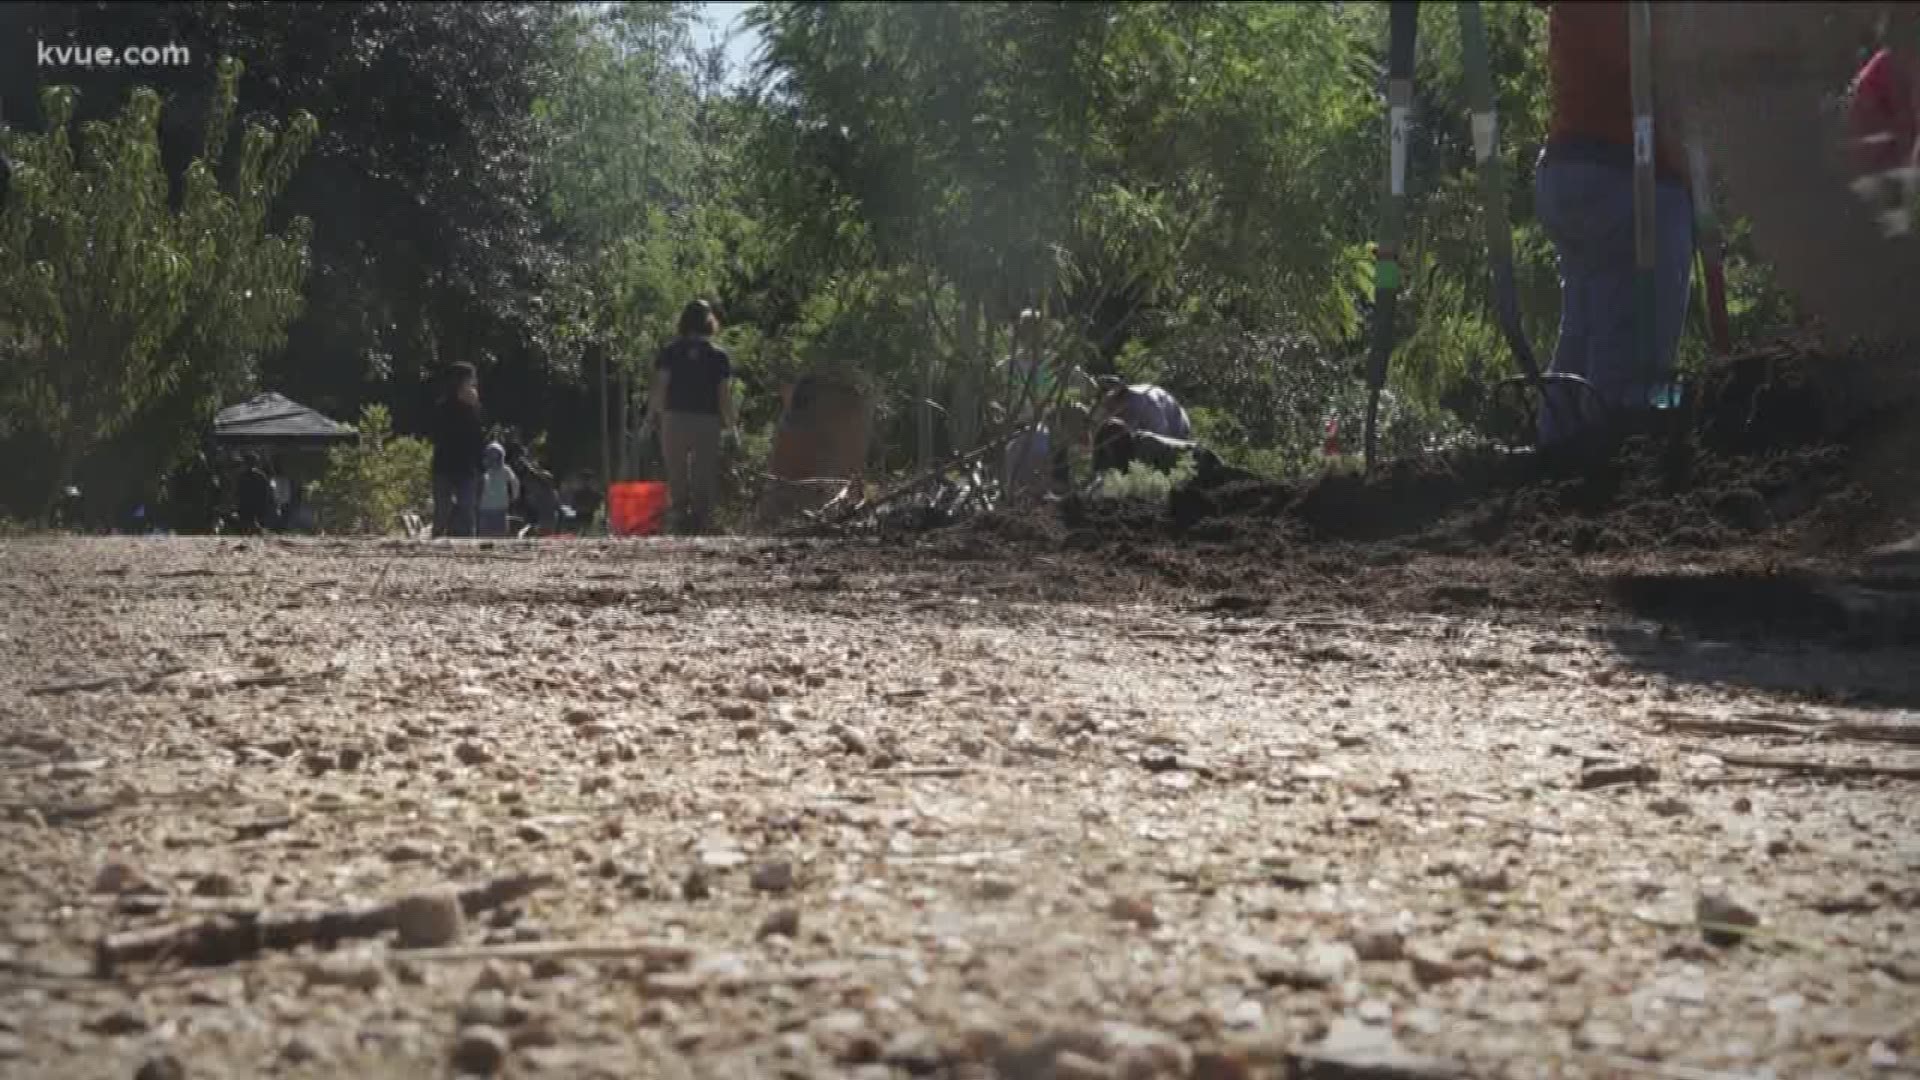 Thousands of Austin residents volunteered to help clean up parks in the area this Saturday.